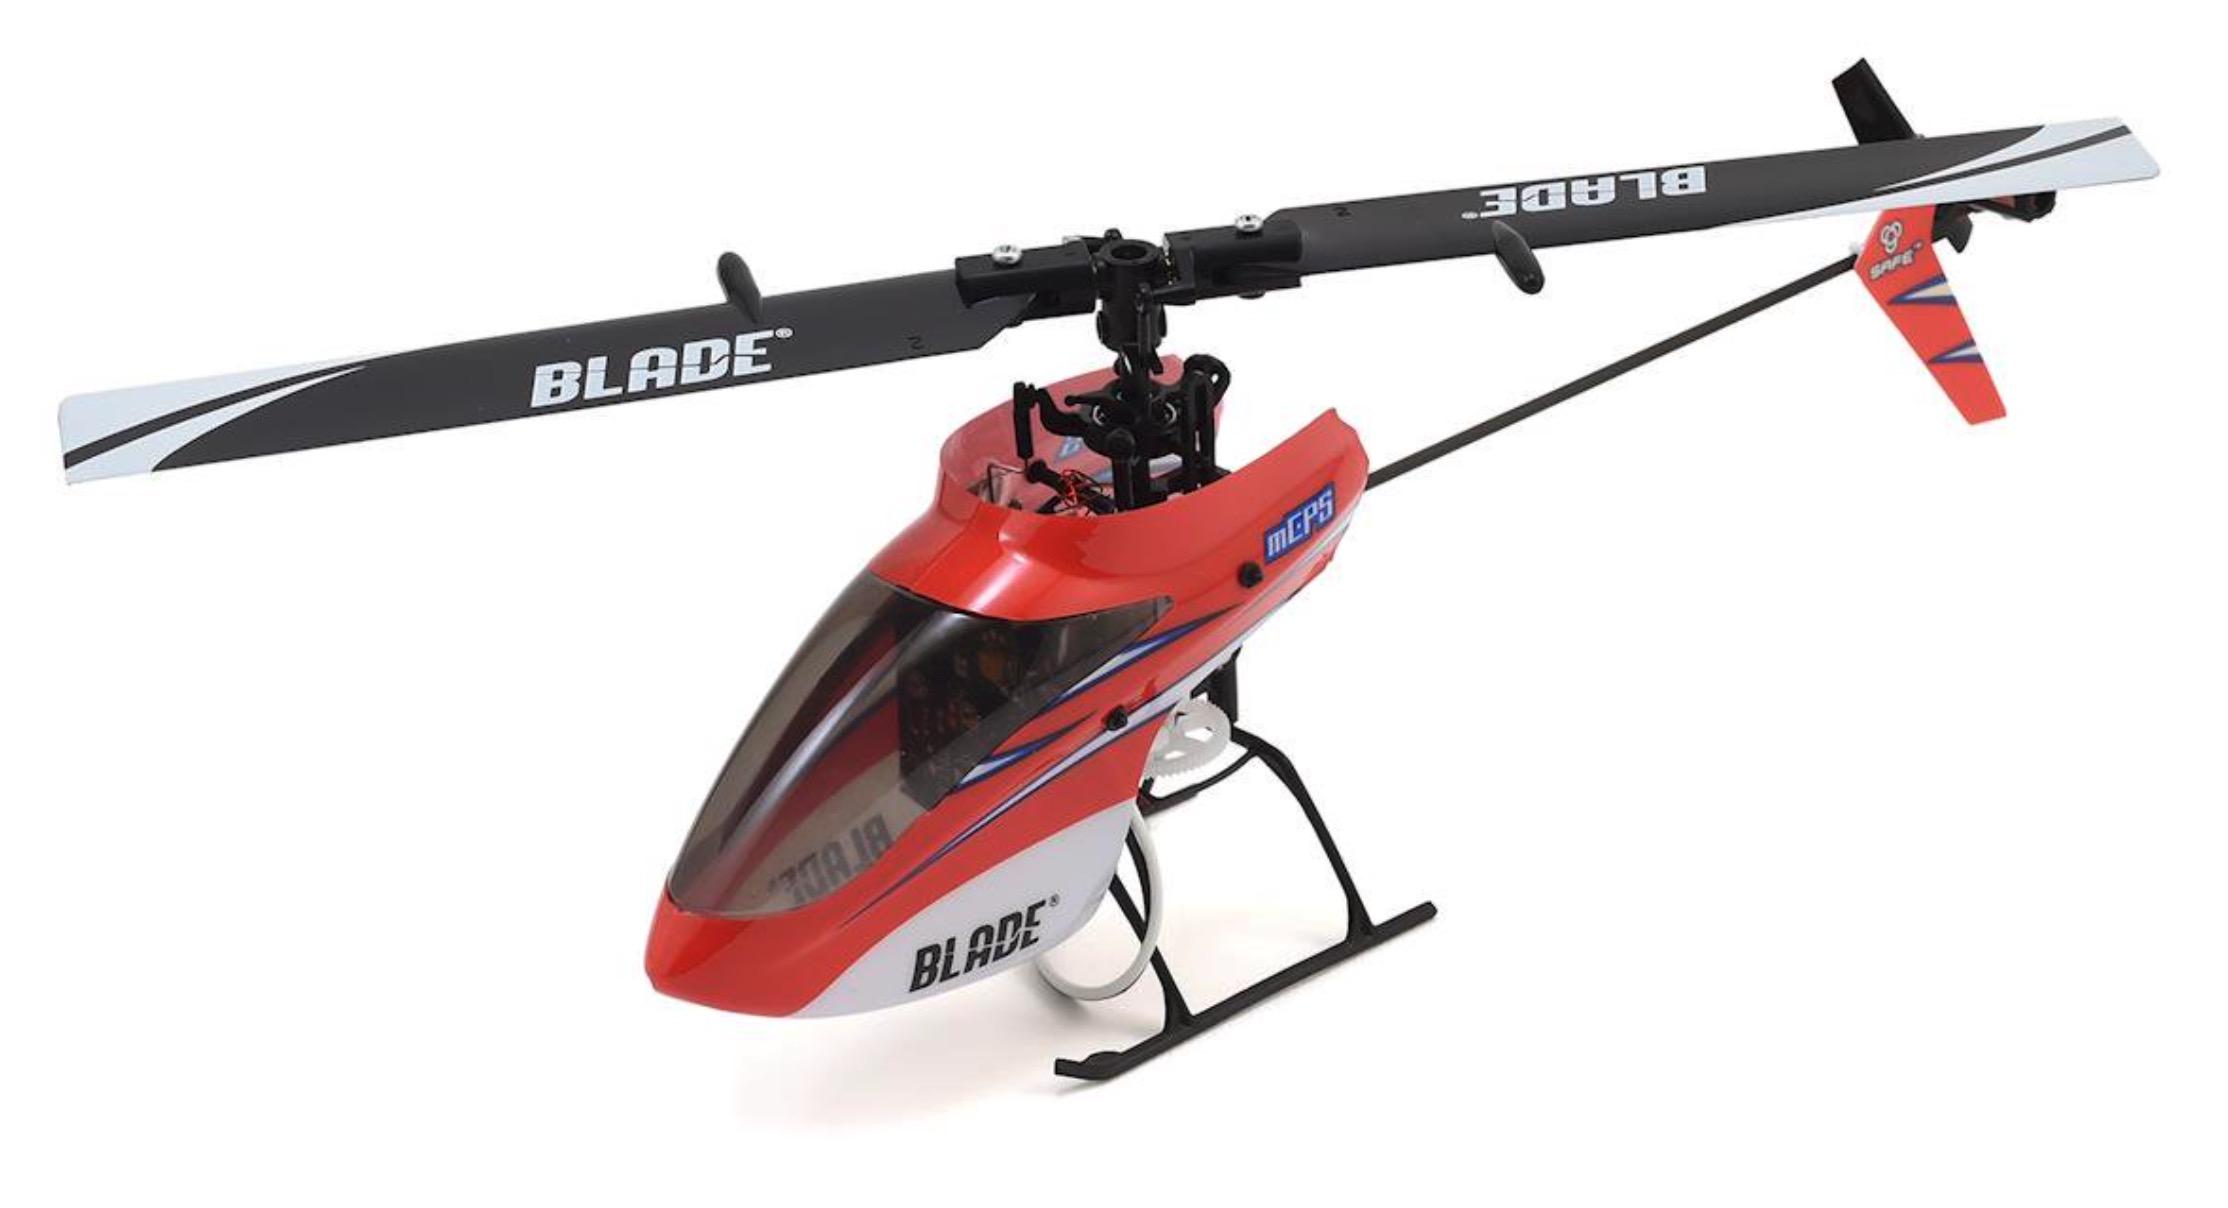 Easiest Remote Control Helicopter To Fly: Top Choice for Beginner Flyers: Blade 70S Remote Control Helicopter